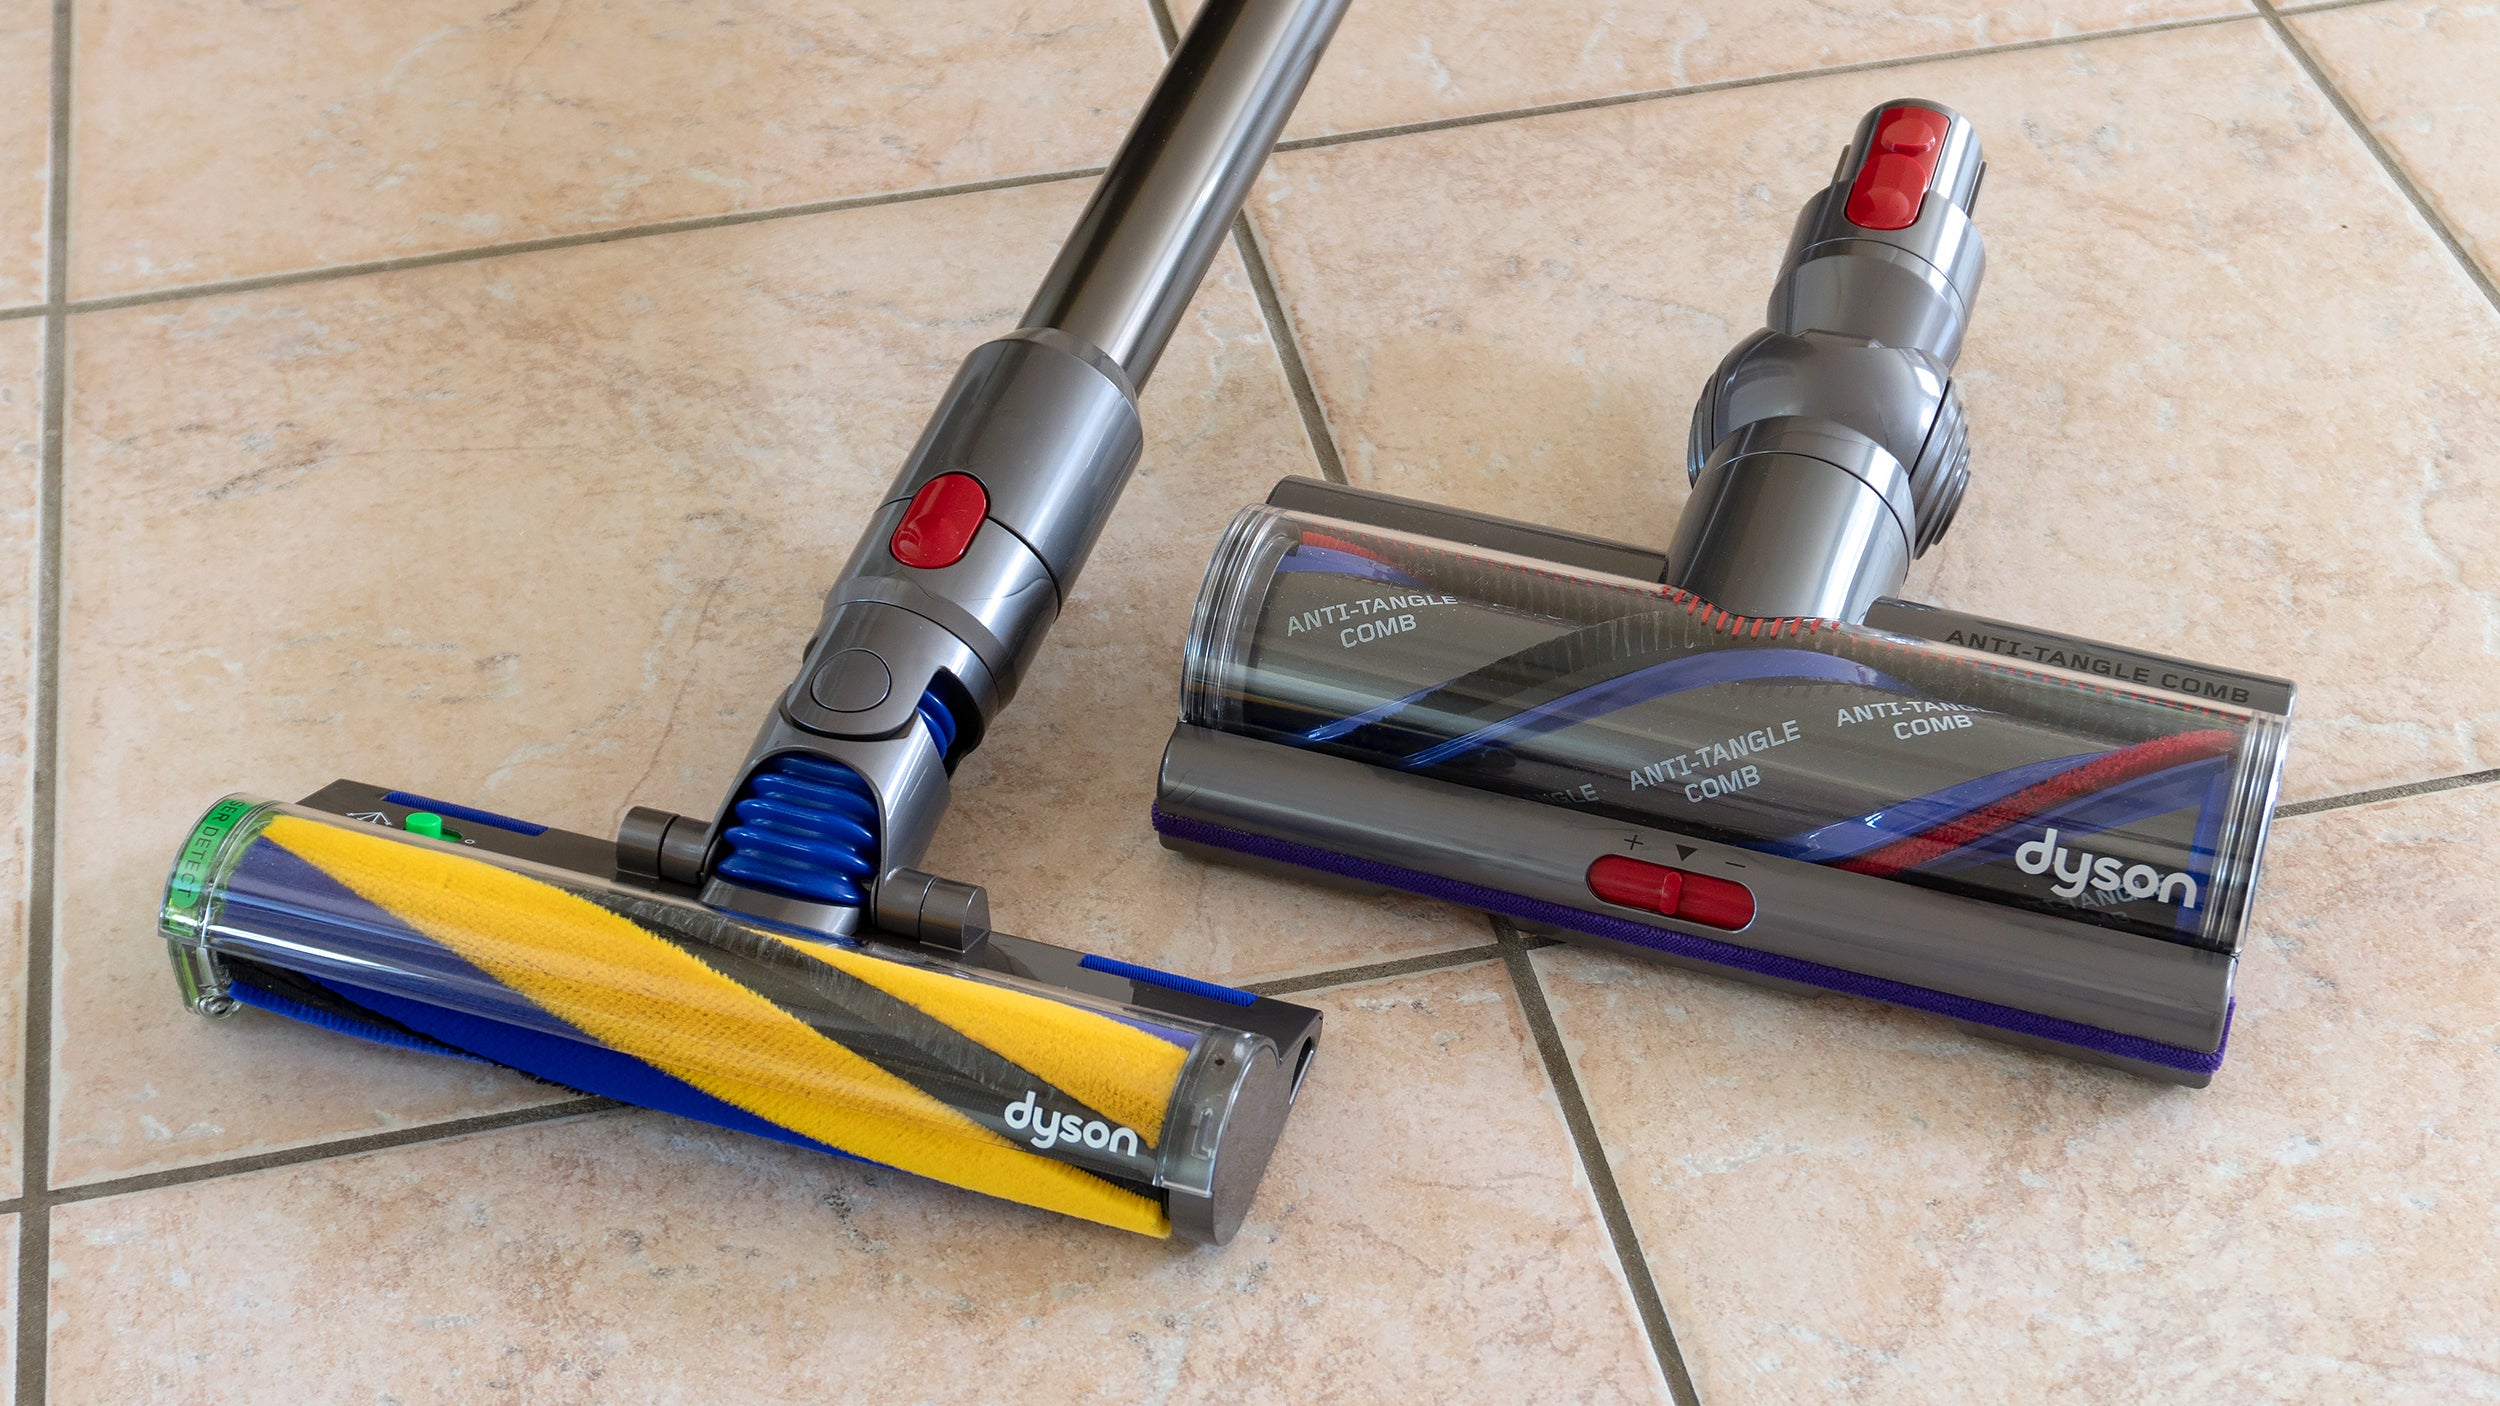 Two floor cleaning heads are included with the Dyson V15 Detect, one for hardwood and tile floors, and one for rugs and carpets. (Photo: Andrew Liszewski/Gizmodo)